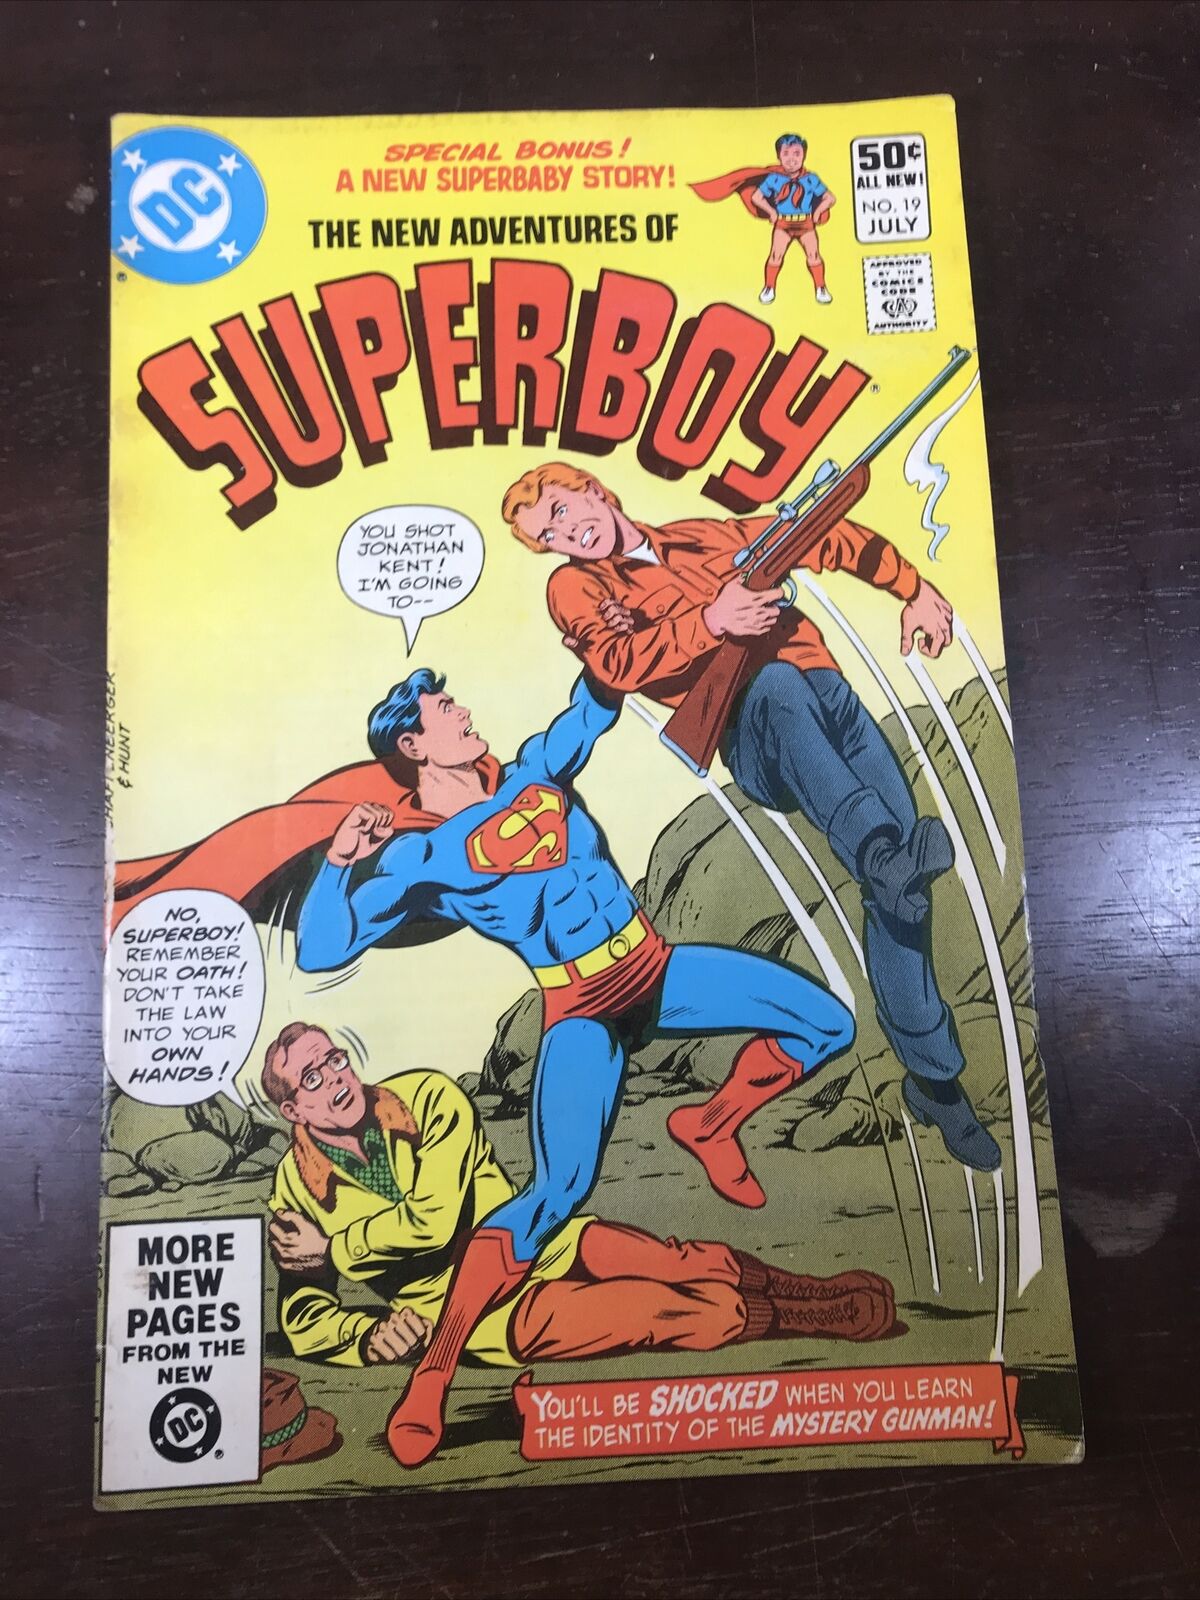 THE NEW ADVENTURES OF SUPERBOY # 19 DC COMIC 1981